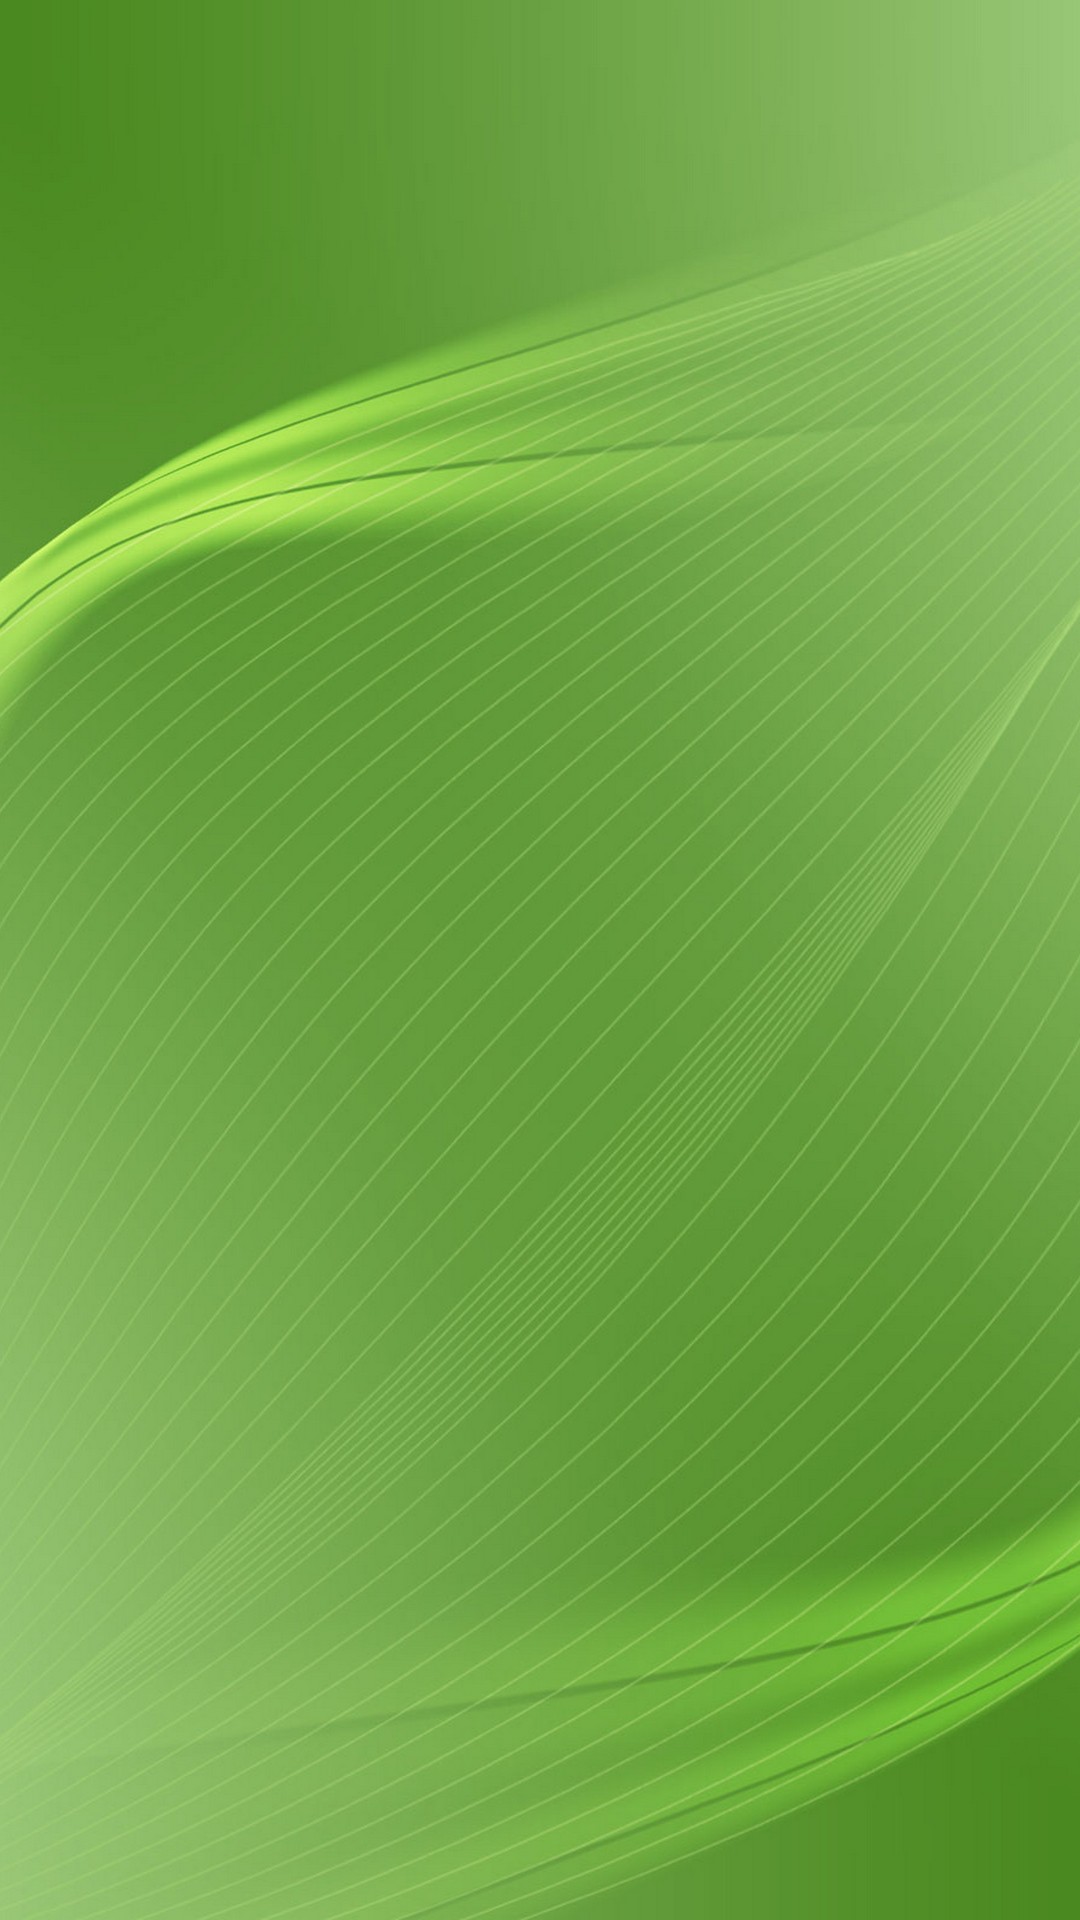 Android Wallpaper HD Green with image resolution 1080x1920 pixel. You can make this wallpaper for your Android backgrounds, Tablet, Smartphones Screensavers and Mobile Phone Lock Screen